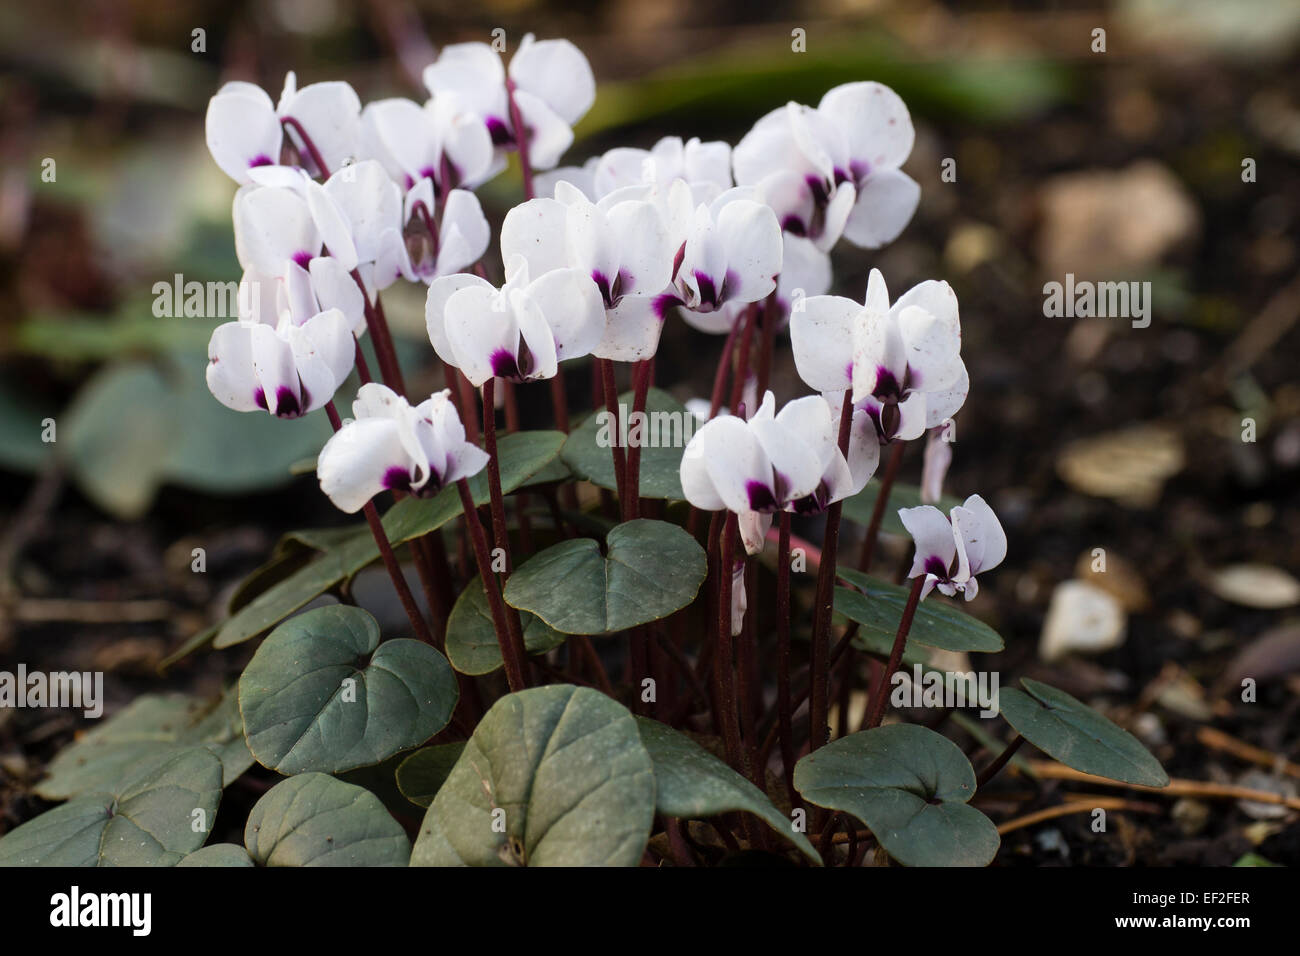 Weather spotted January flowers of the hardy tuber, Cyclamen coum 'Album' Stock Photo